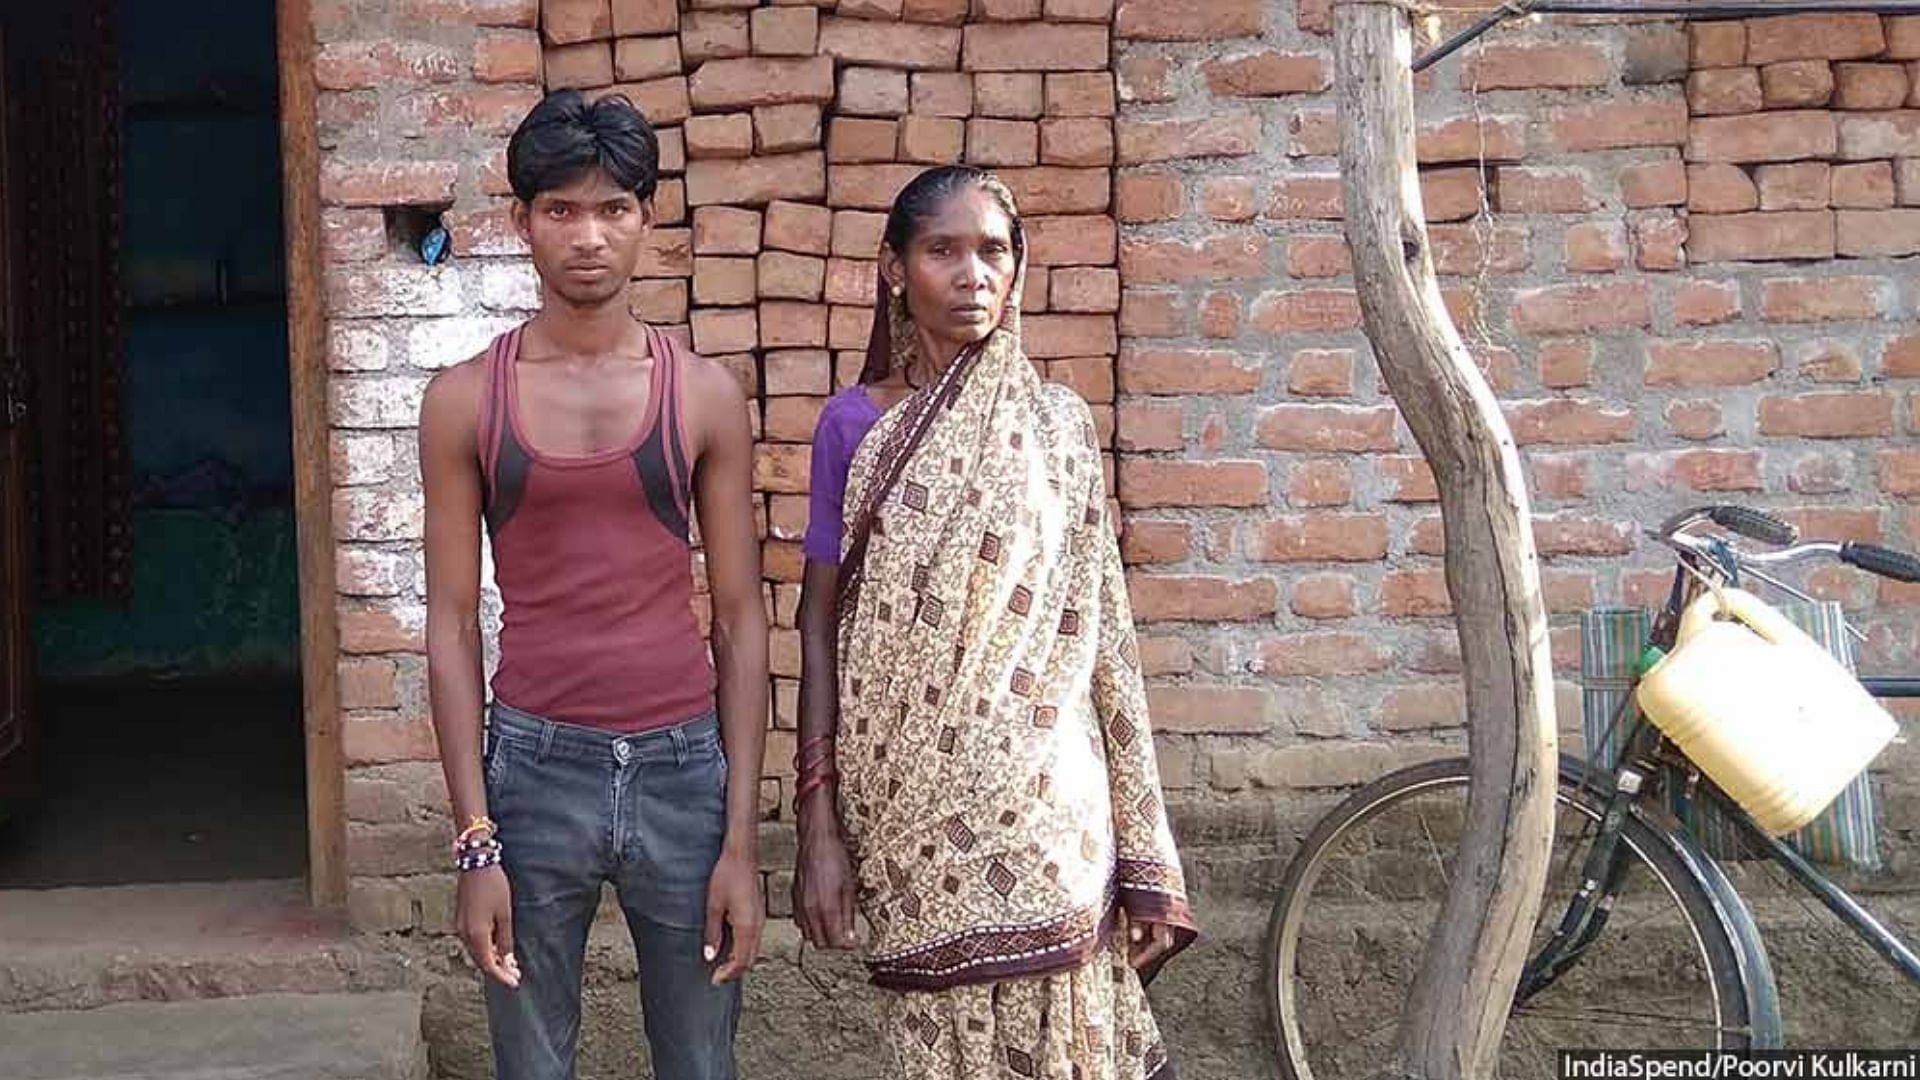 Rekha Madavi, 45, and her youngest son, Bhimrao, 25, outside their house in Chak Mankapur, an adivasi village in eastern Maharashtra’s Chandrapur district.